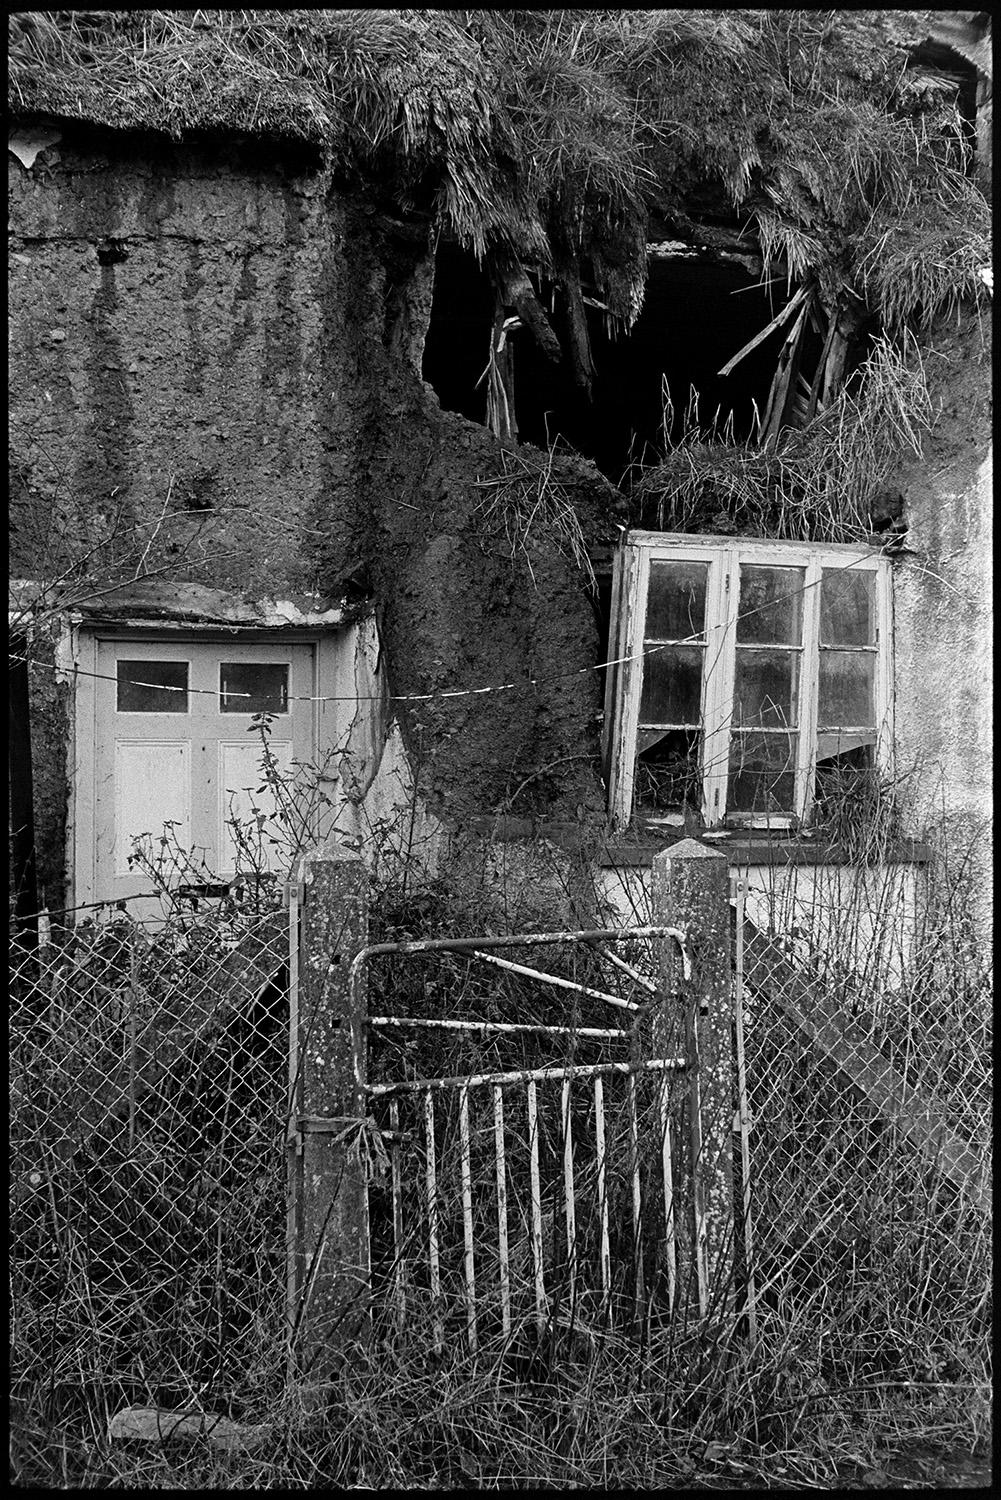 Derelict collapsing farmhouse cob and thatch old cob barn. 
[A crumbling cob and thatch farmhouse at Combe Farm, Upcott, Dolton. The thatch roof is falling onto a window and door. A metal gate and wire fence are outside the farmhouse.]